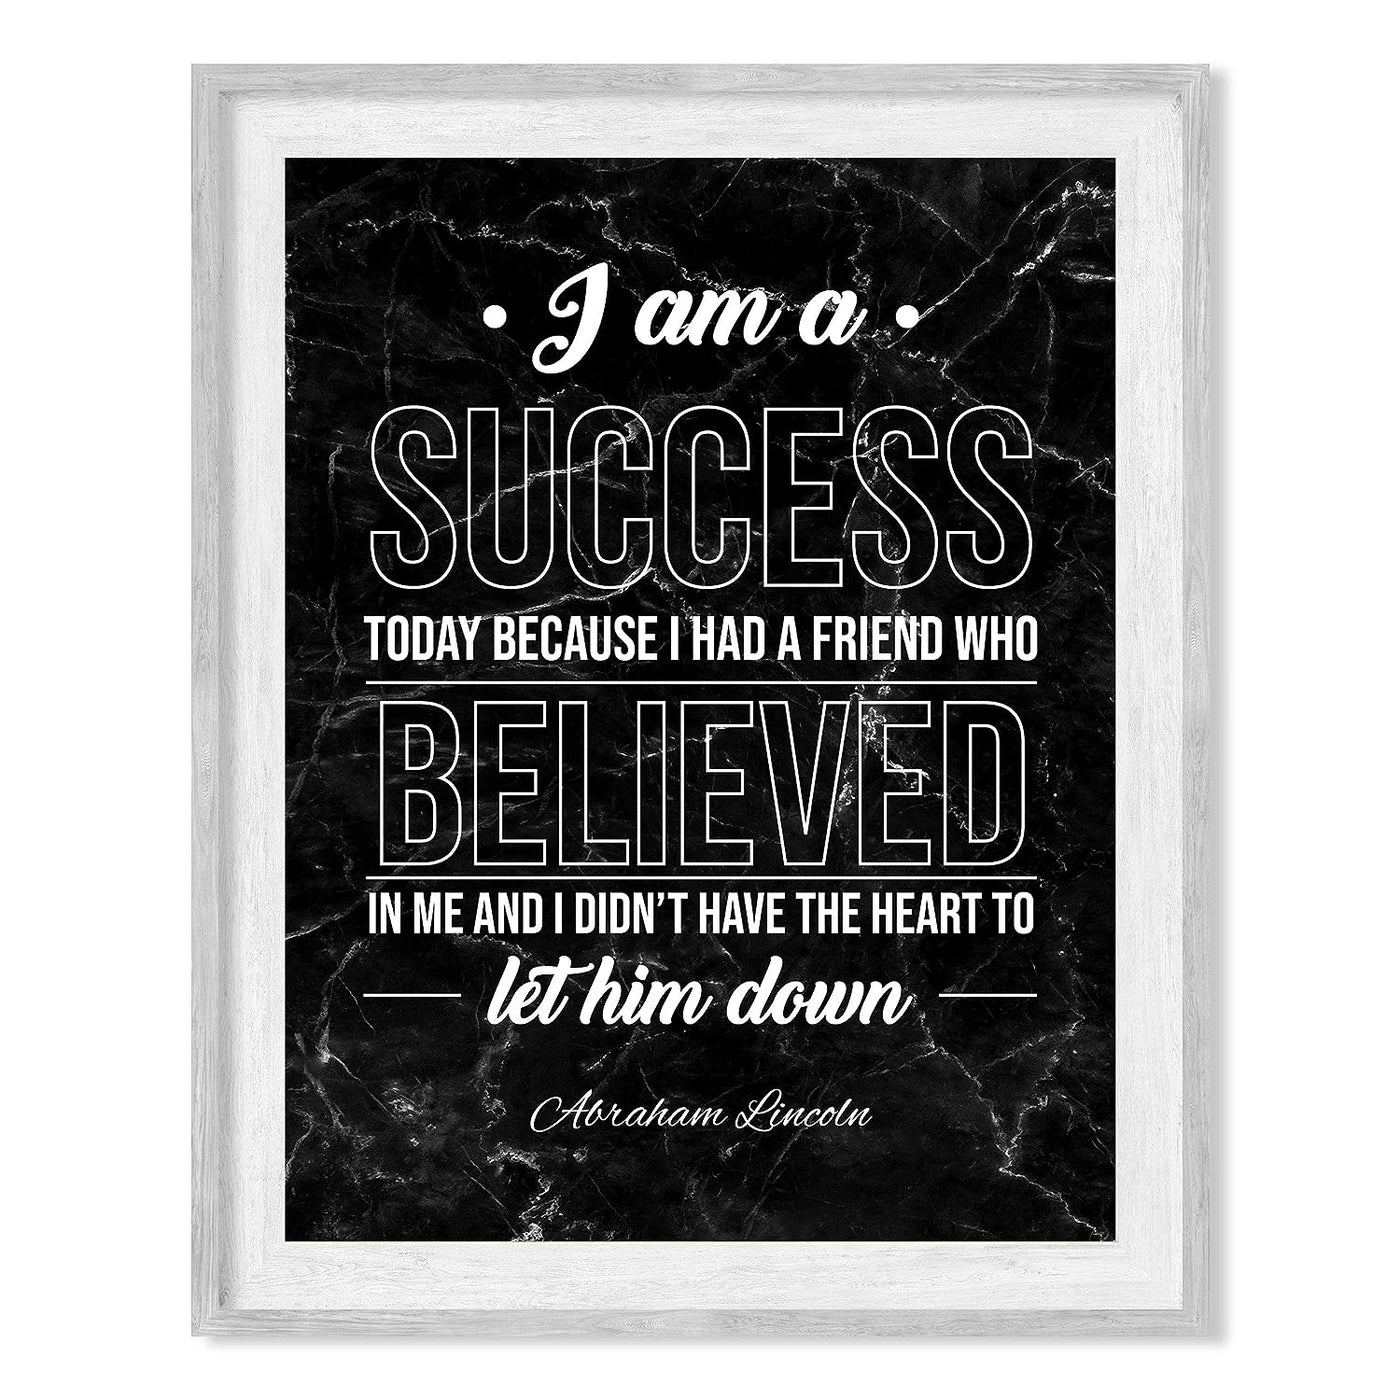 Abraham Lincoln Quotes-"I Am A Success"-Motivational Wall Art -8 x 10" Inspirational Typographic Print-Ready to Frame. Home-Office-Cave-Patriotic Decor. Perfect Library-History-Classroom Sign!